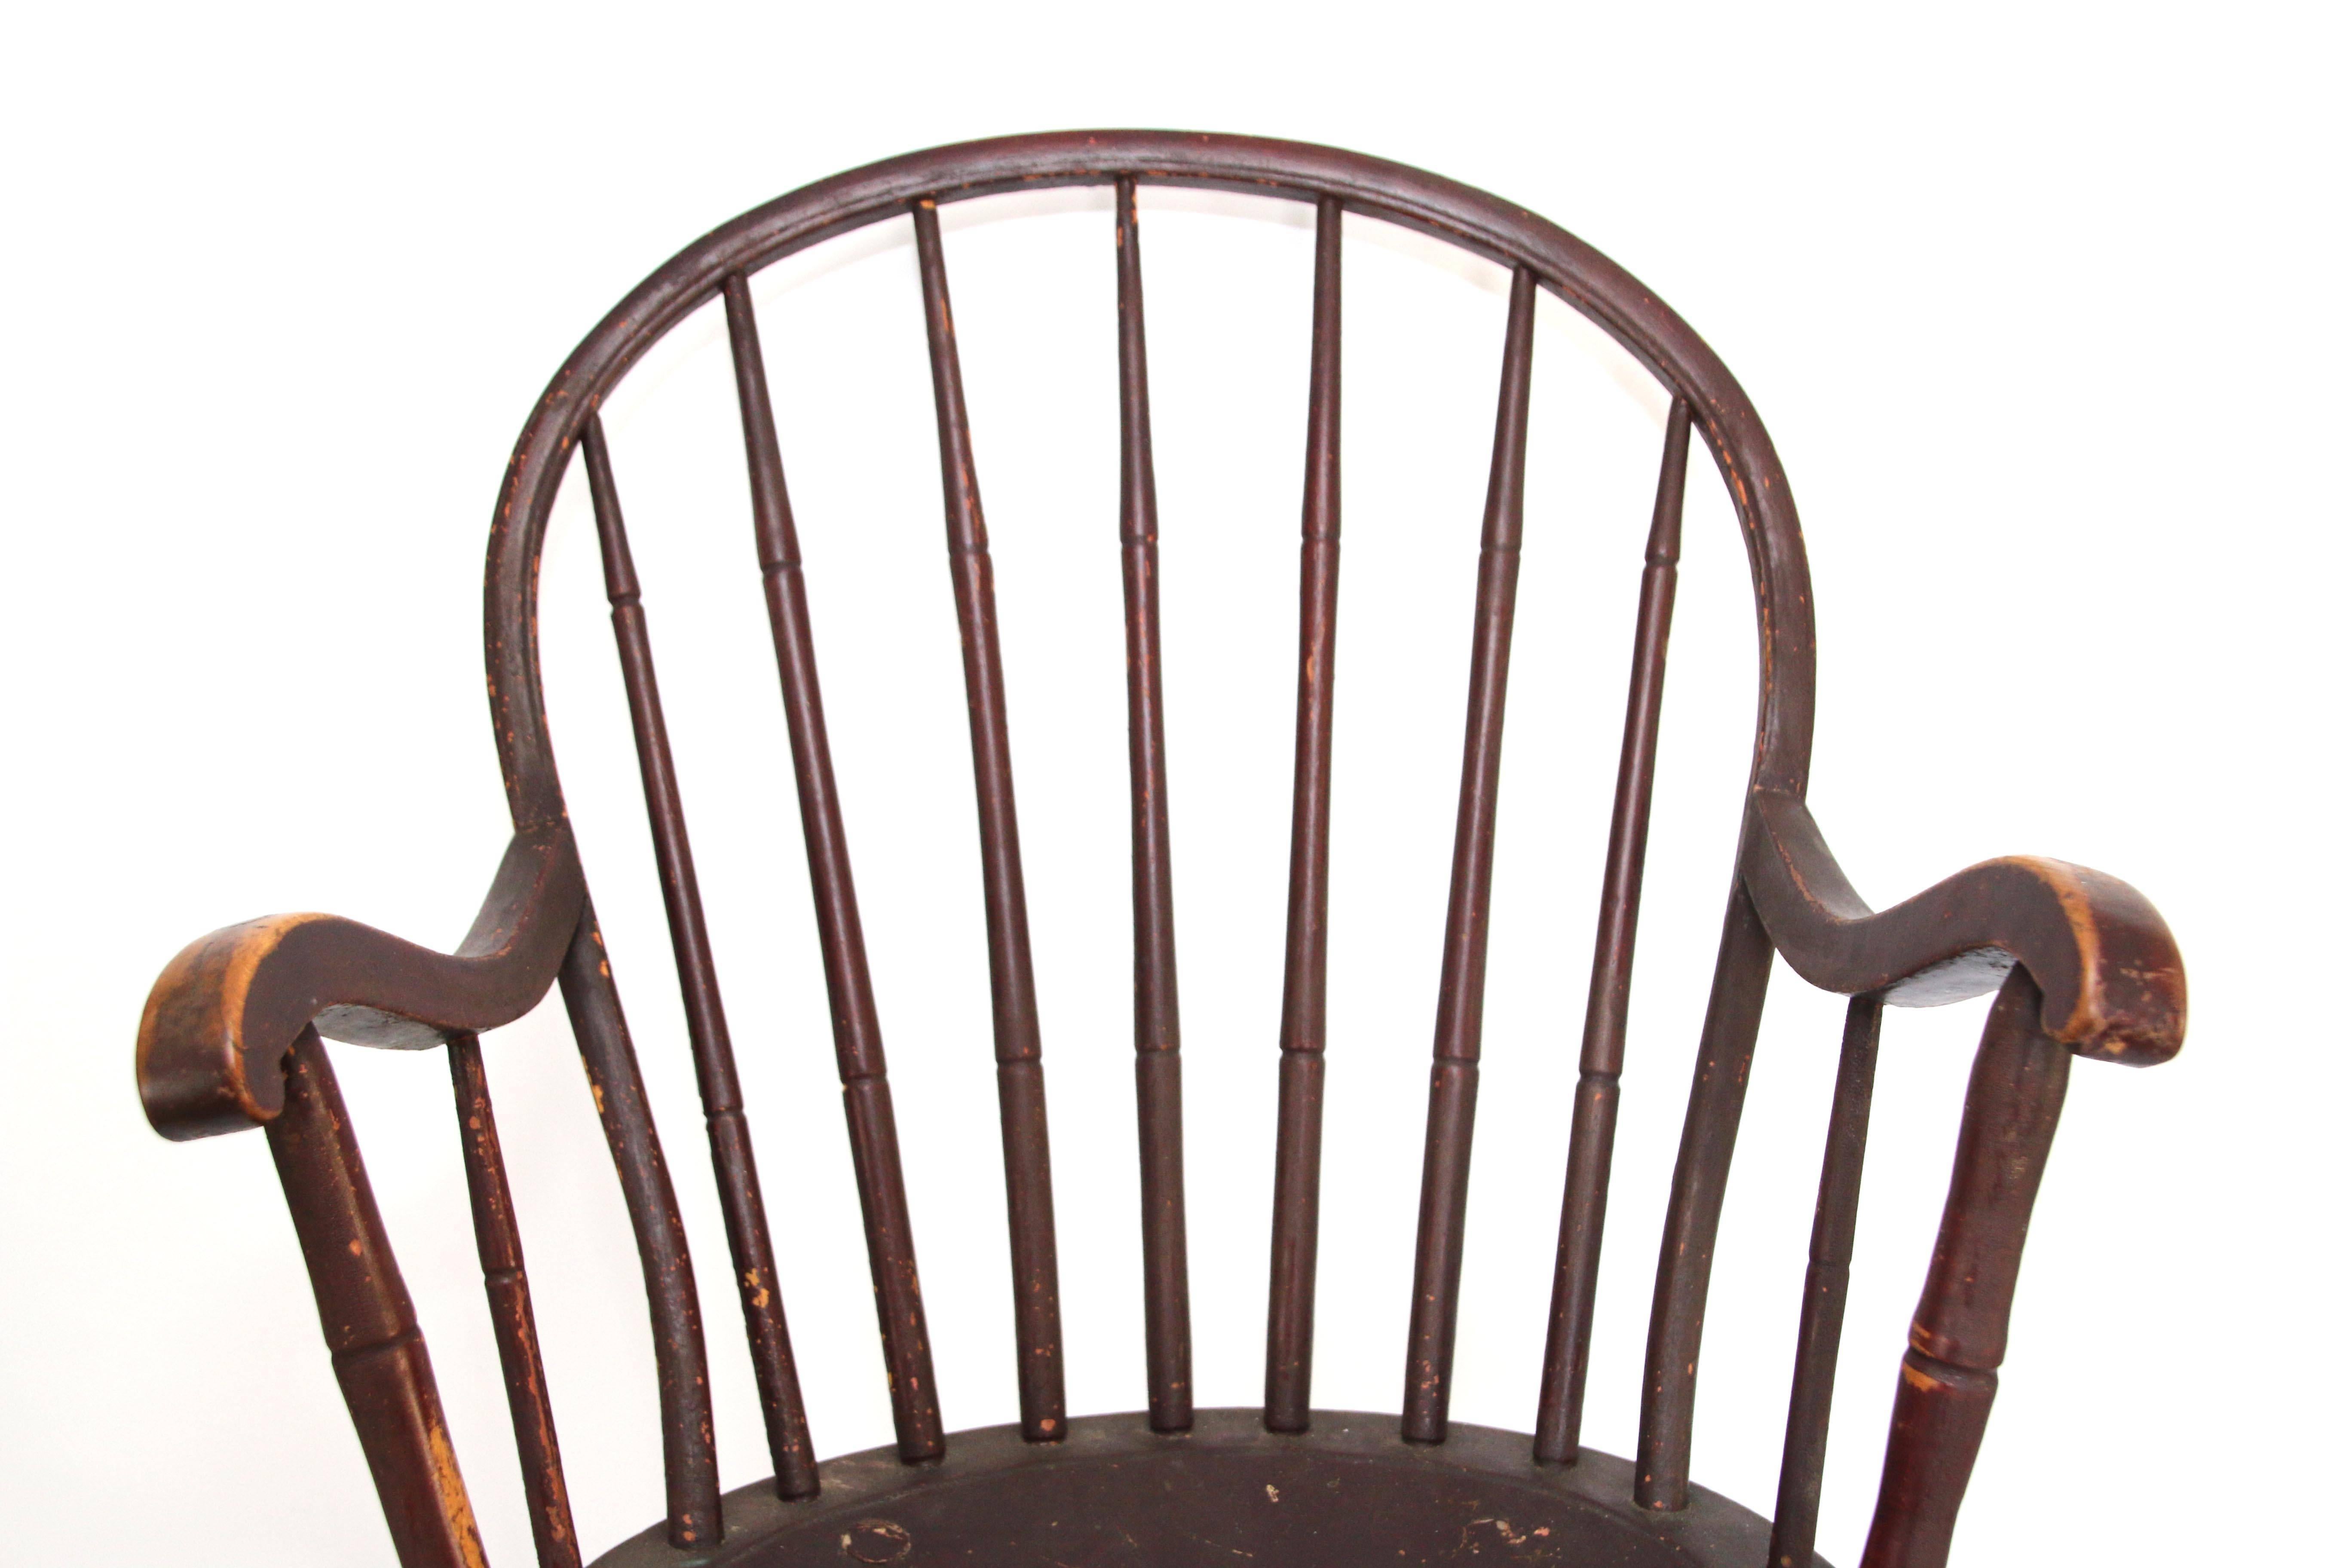 Bowback windsor armchair in red paint. The bowed crest rail above nine spindles, continuing to serpentine arms to the hoop back and all joined to the shield-shaped seat, raised on simulated and swelled splayed legs joined by a similar H-stretcher in